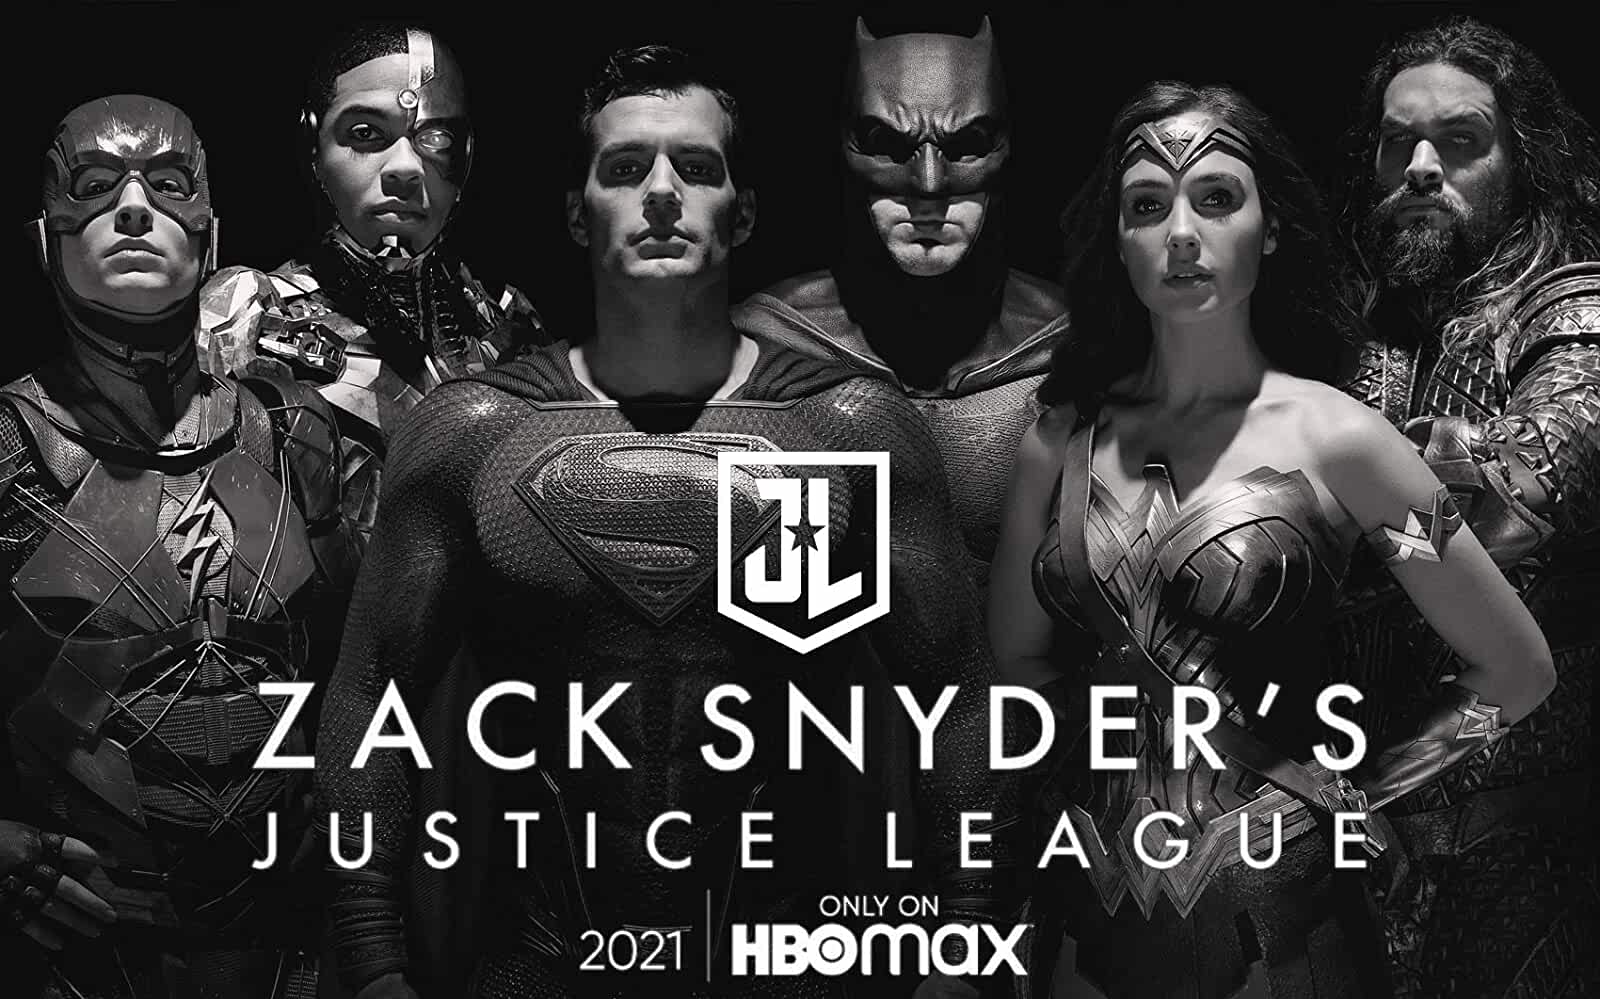 Zack Snyder’s Justice League Is Looking To Release In Just A Couple Of Months